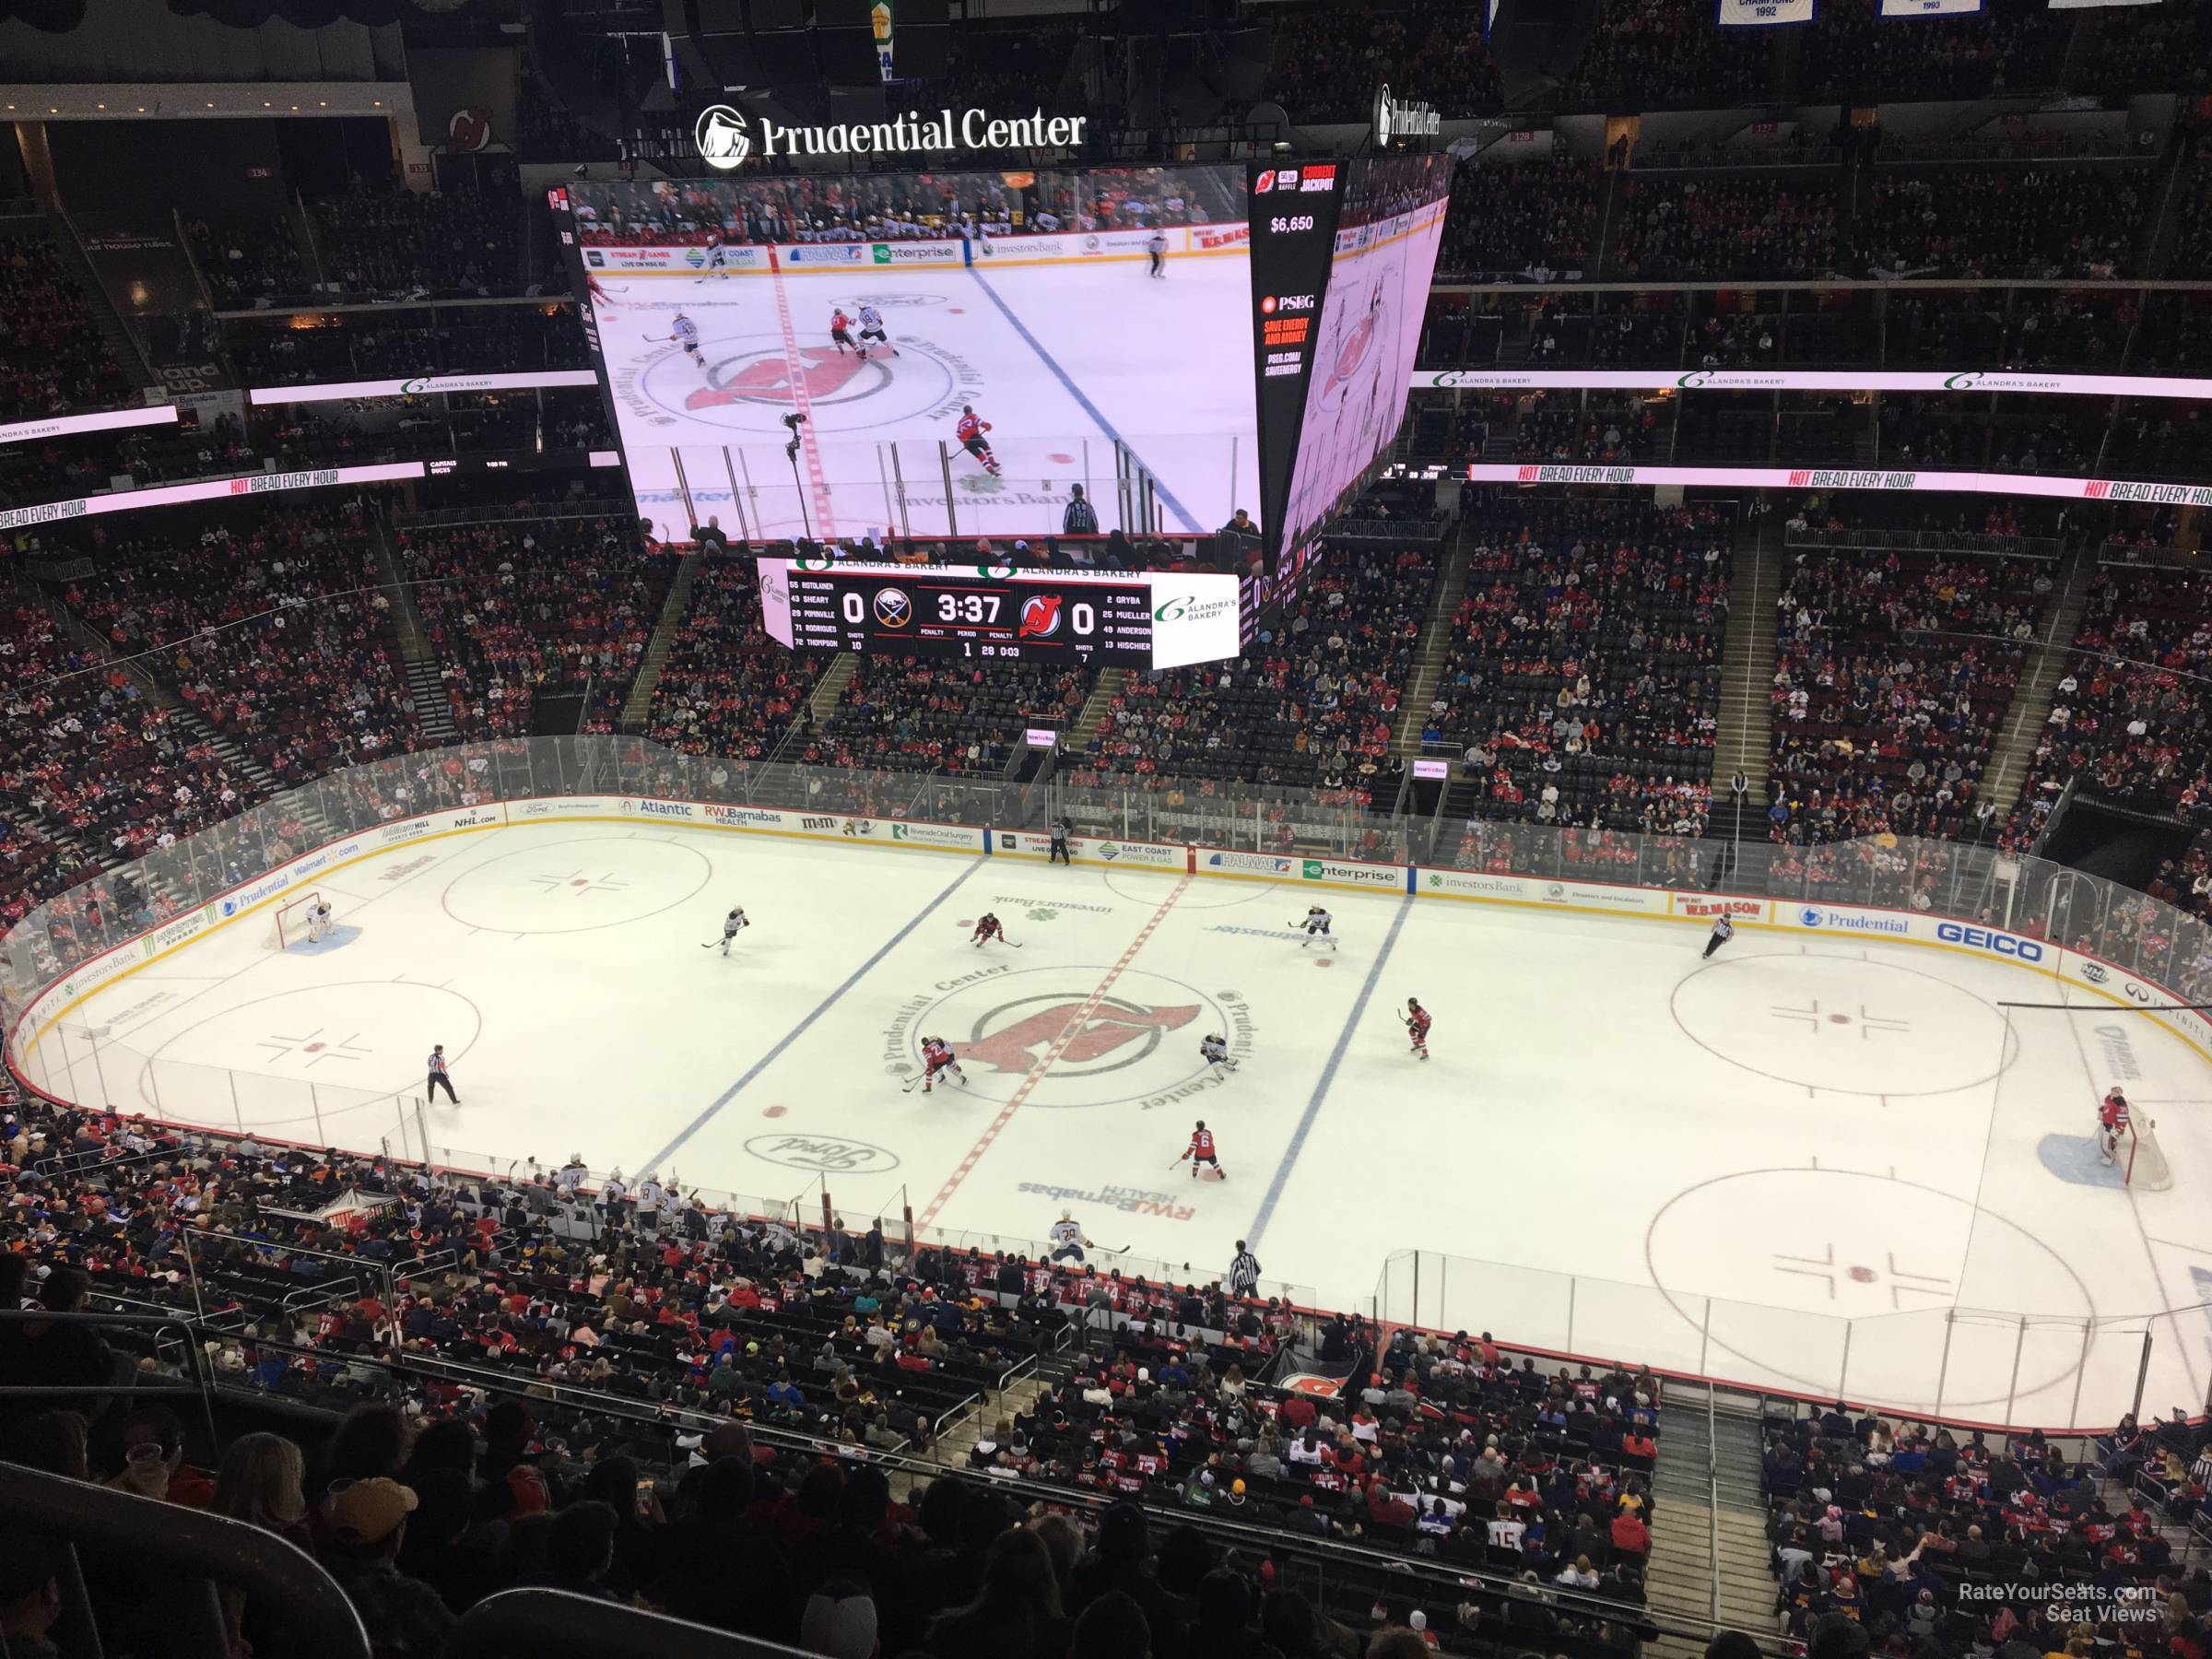 Section 133 at Prudential Center 